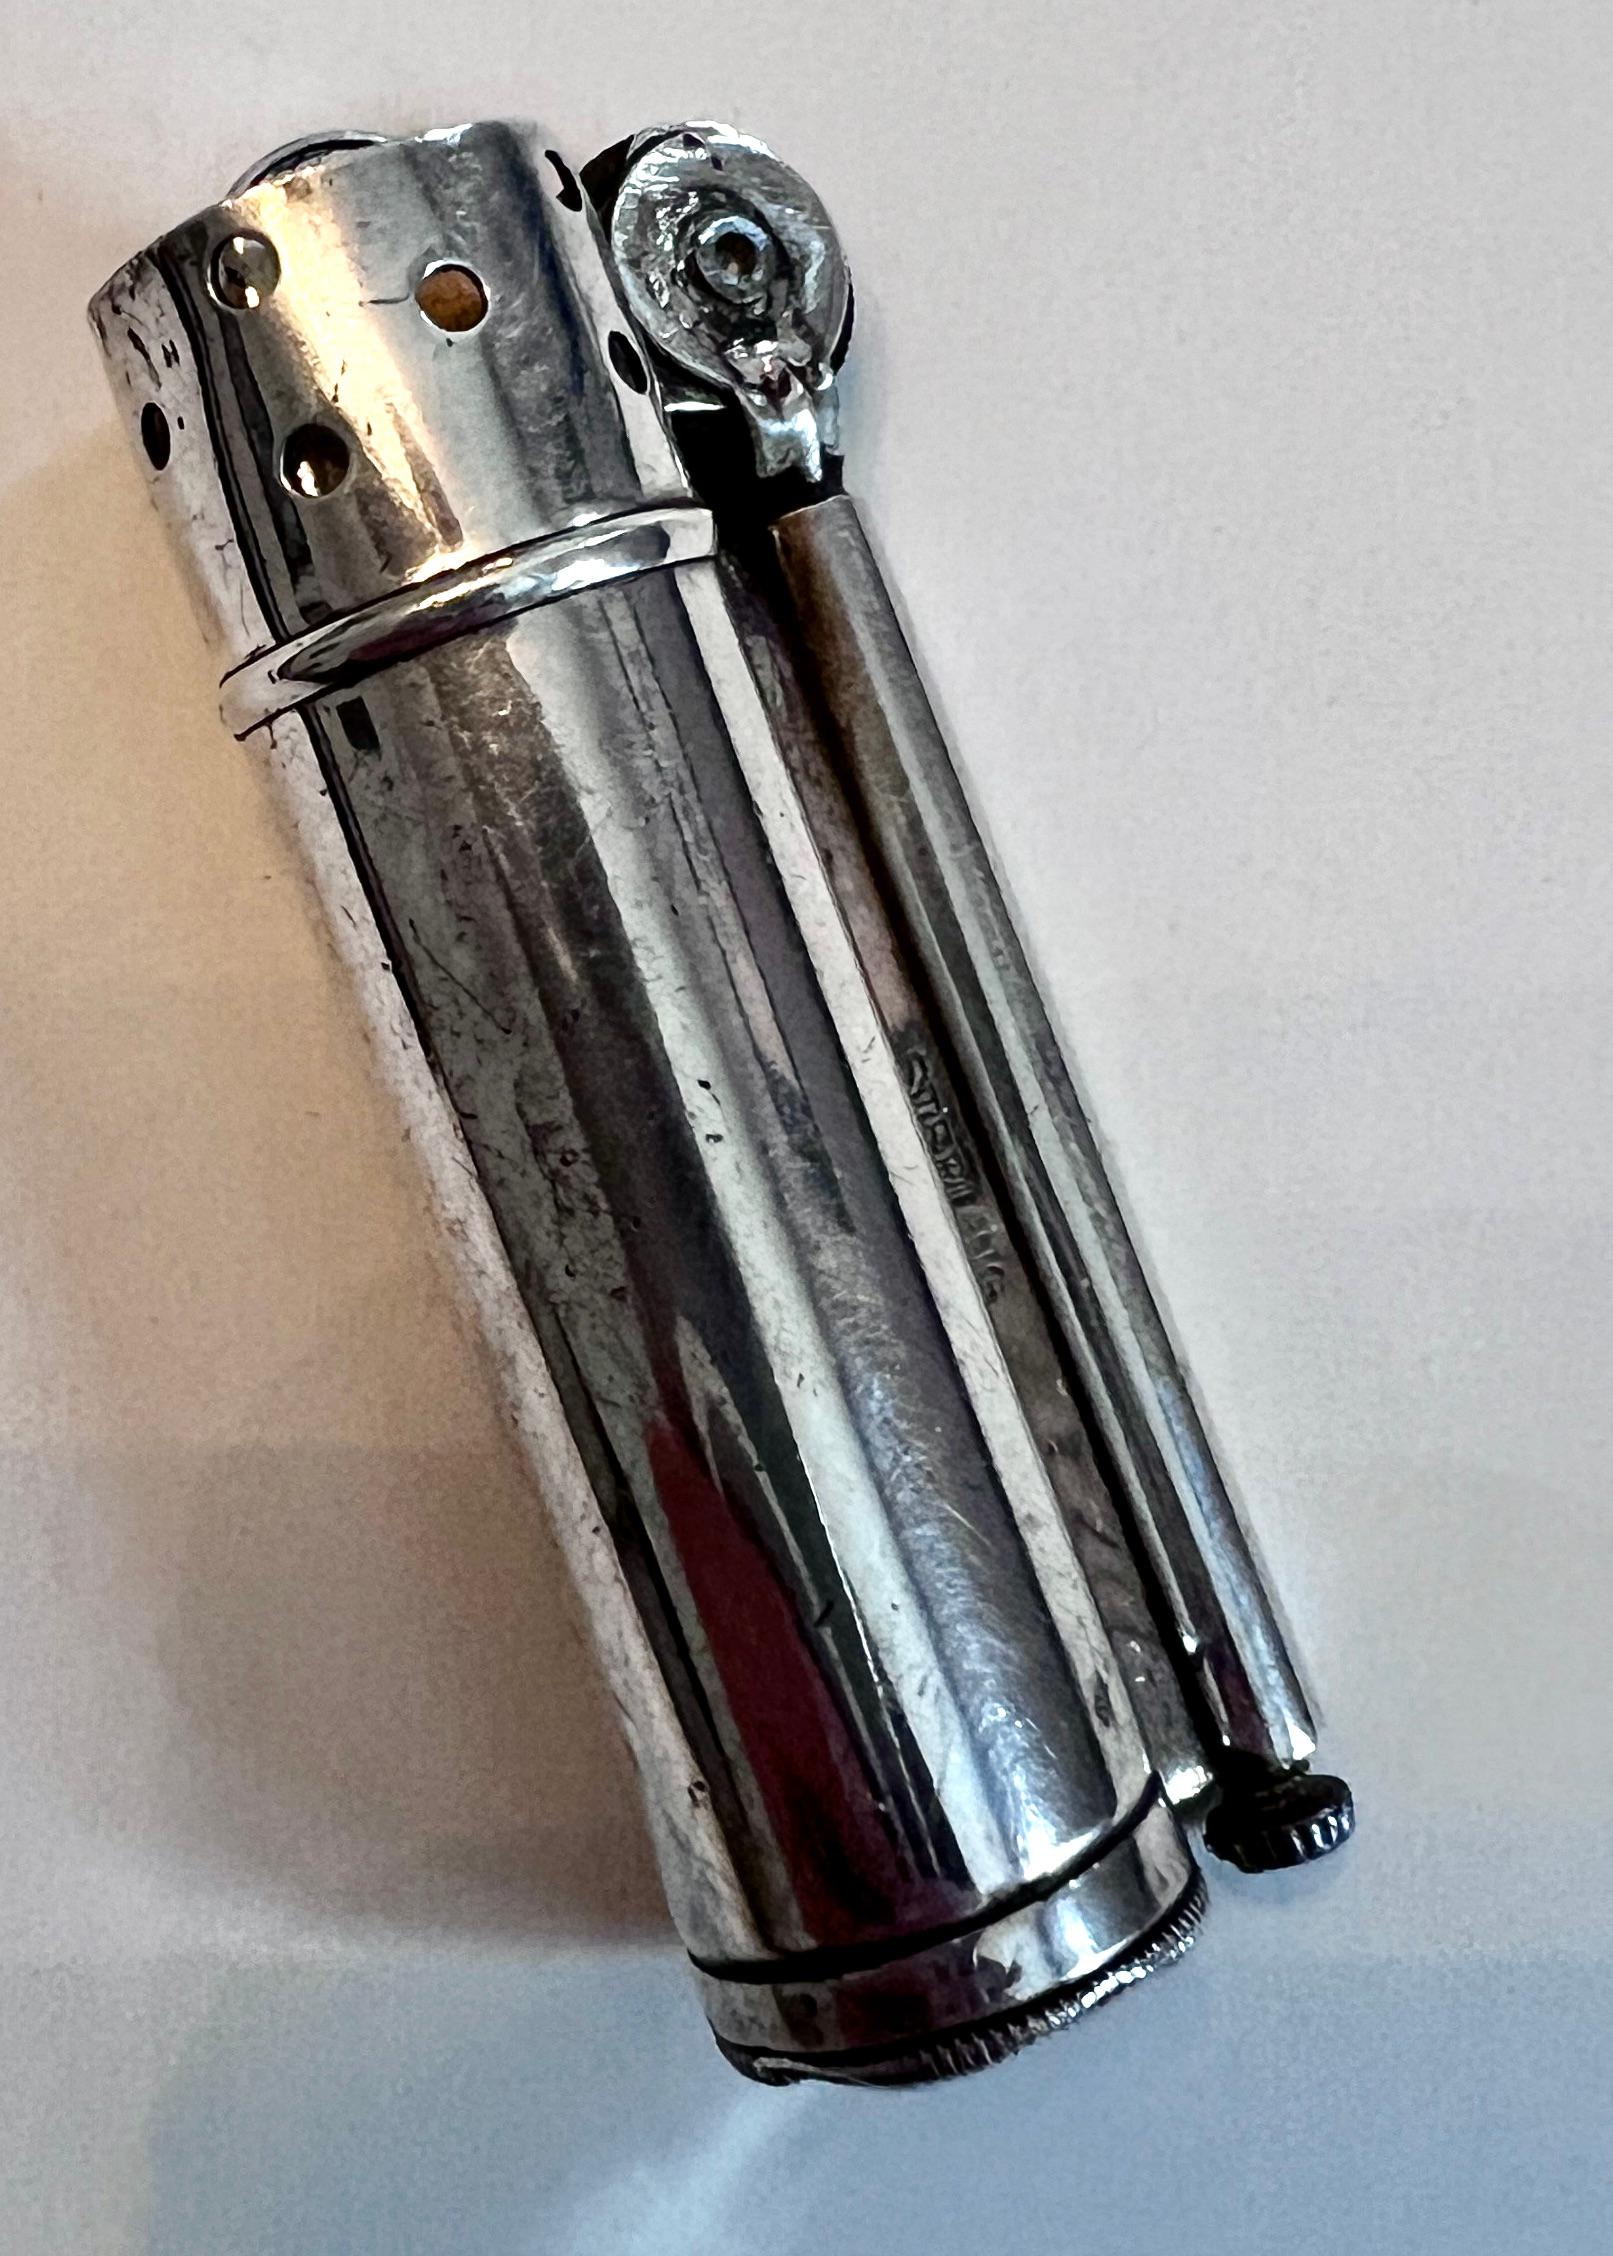 Sterling Silver Service lighter by Alfred Dunhill.  The lighter was designed for Sailors in the 1940's.  The piece is stamped sterling and has been fully restored and works beautifully.

The lighter is easily stored in ones pocket and can light